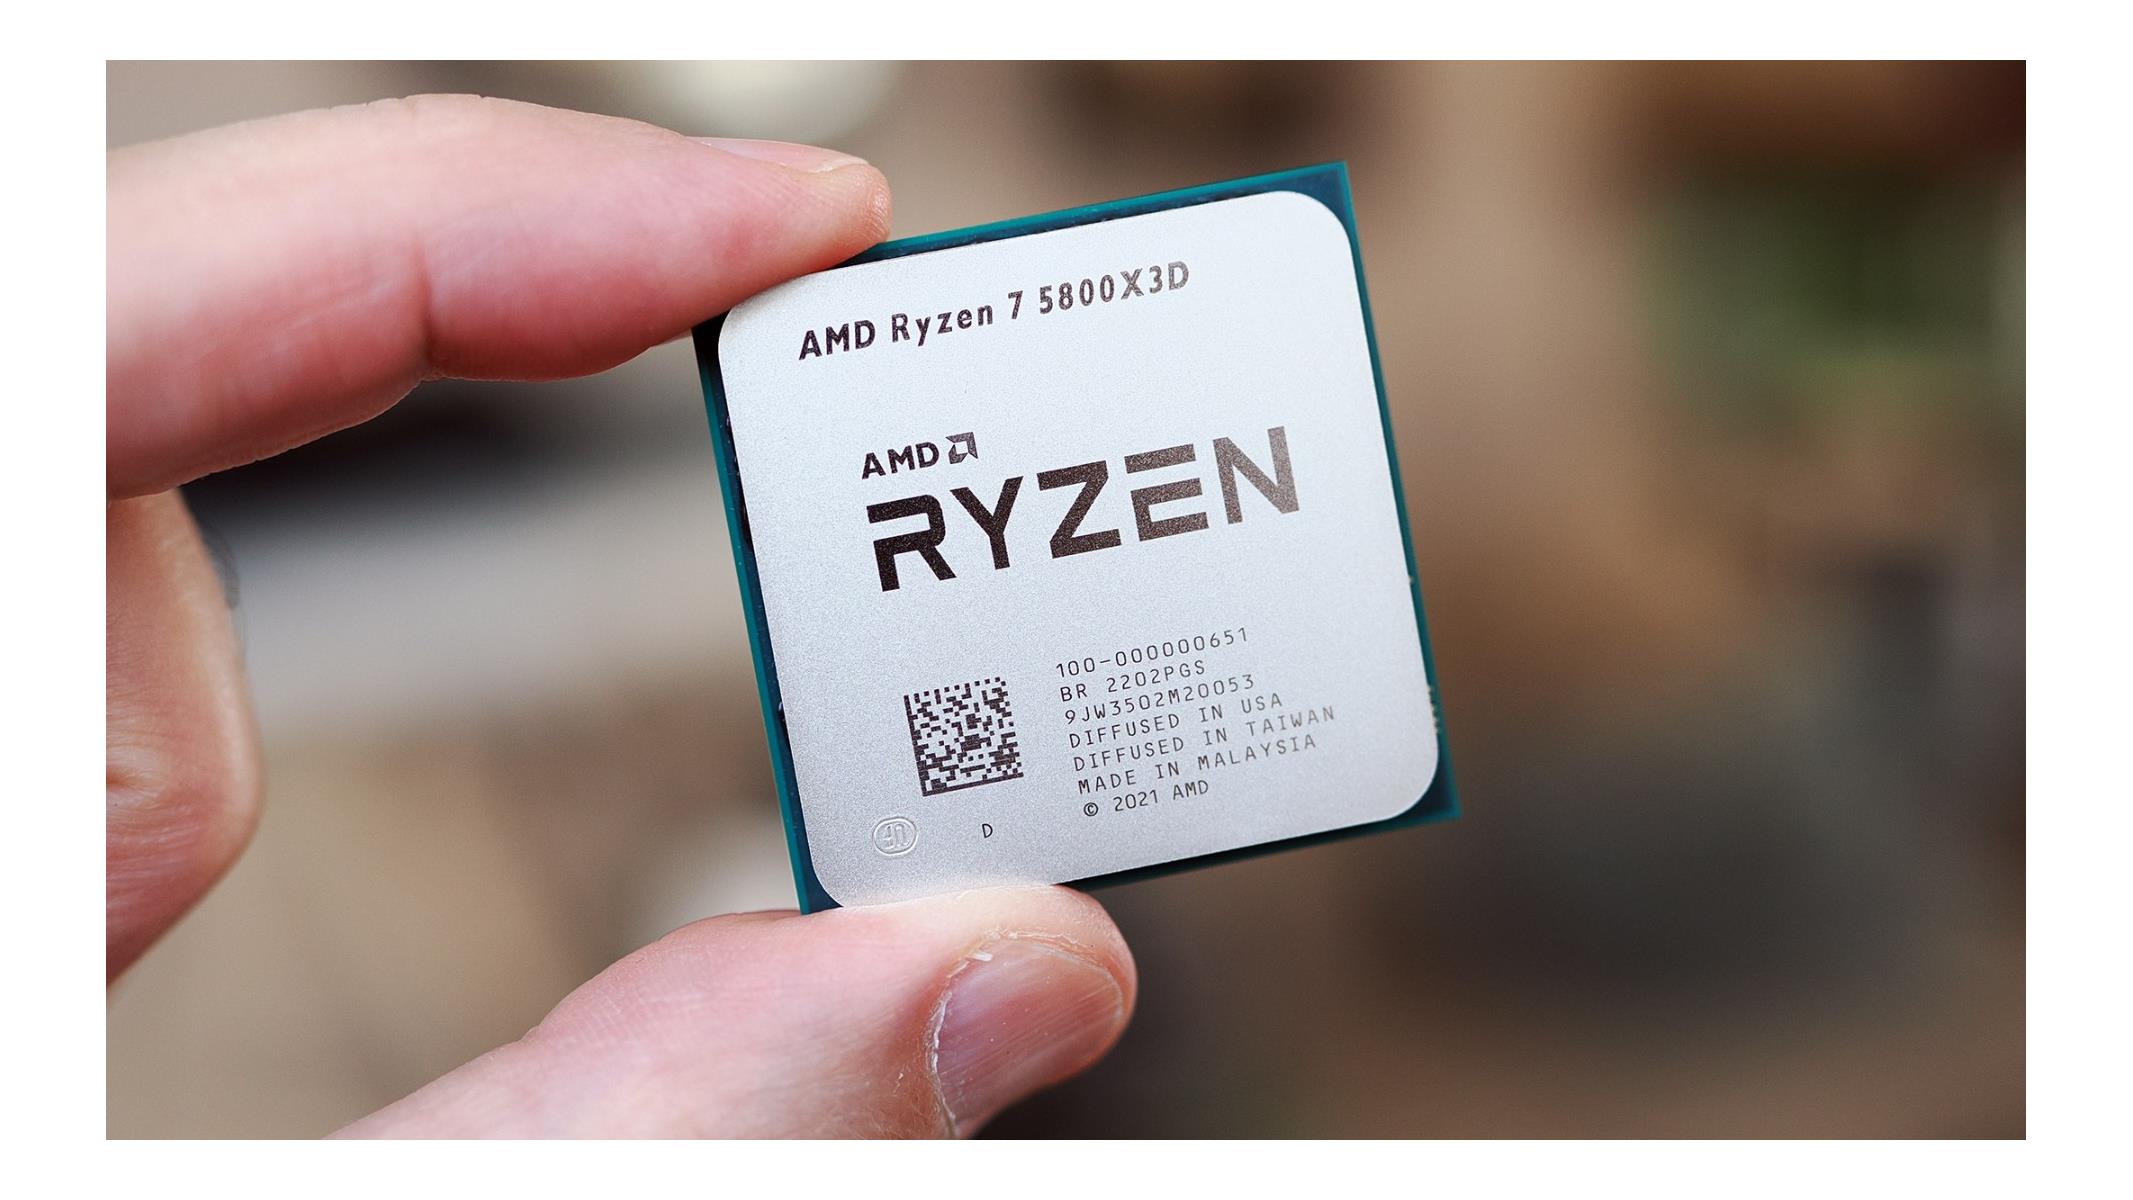 AMD Ryzen 7 5800X3D CPU Review: The King Of PC Gaming | HotHardware